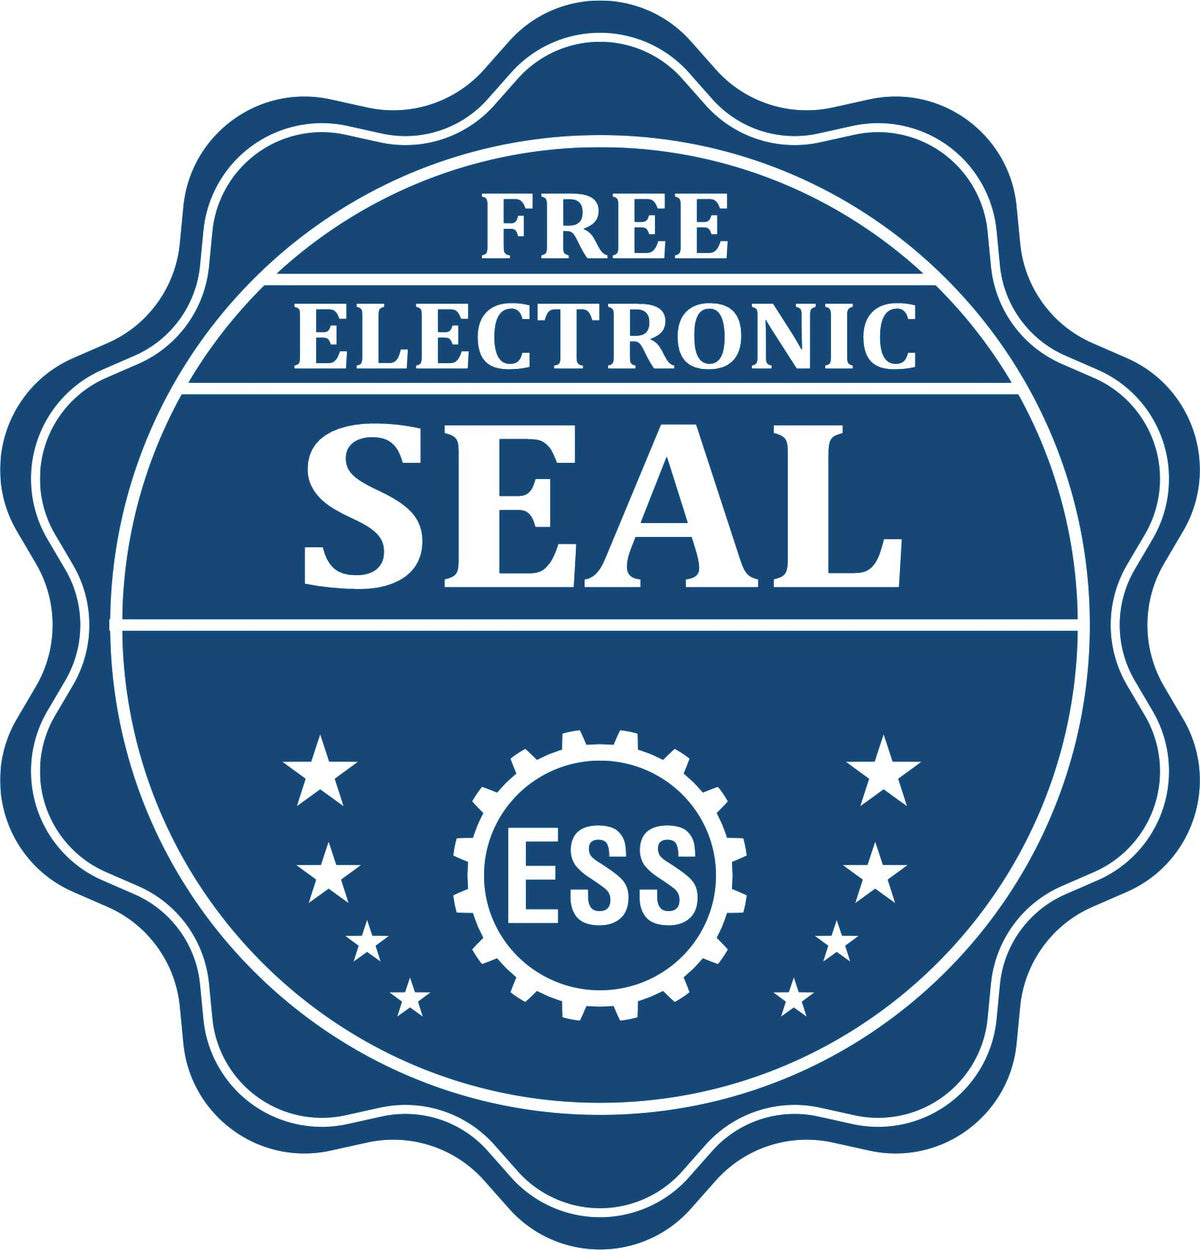 A badge showing a free electronic seal for the Hybrid Connecticut Land Surveyor Seal with stars and the ESS gear on the emblem.